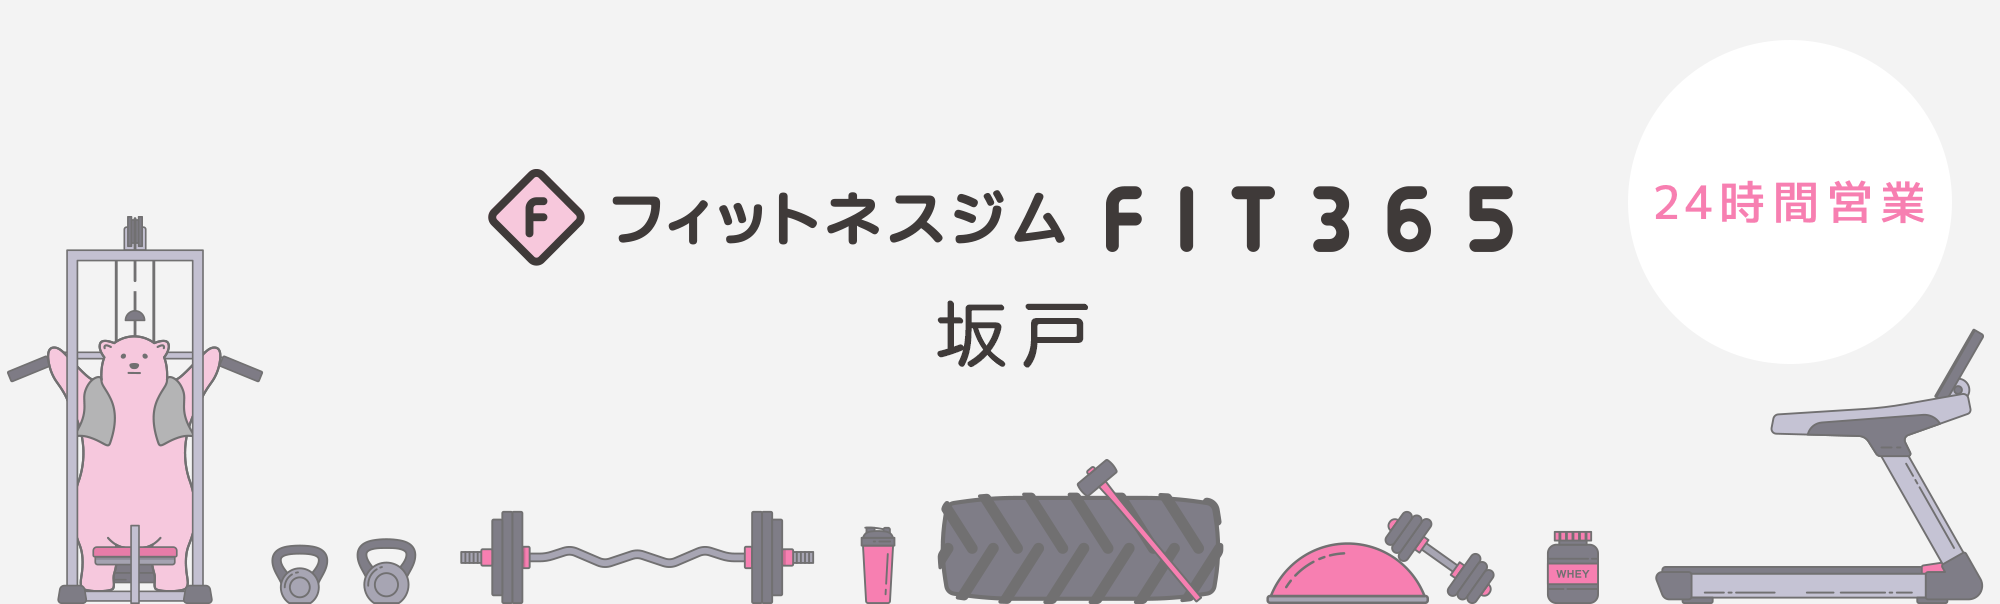 FIT365 コープ坂戸